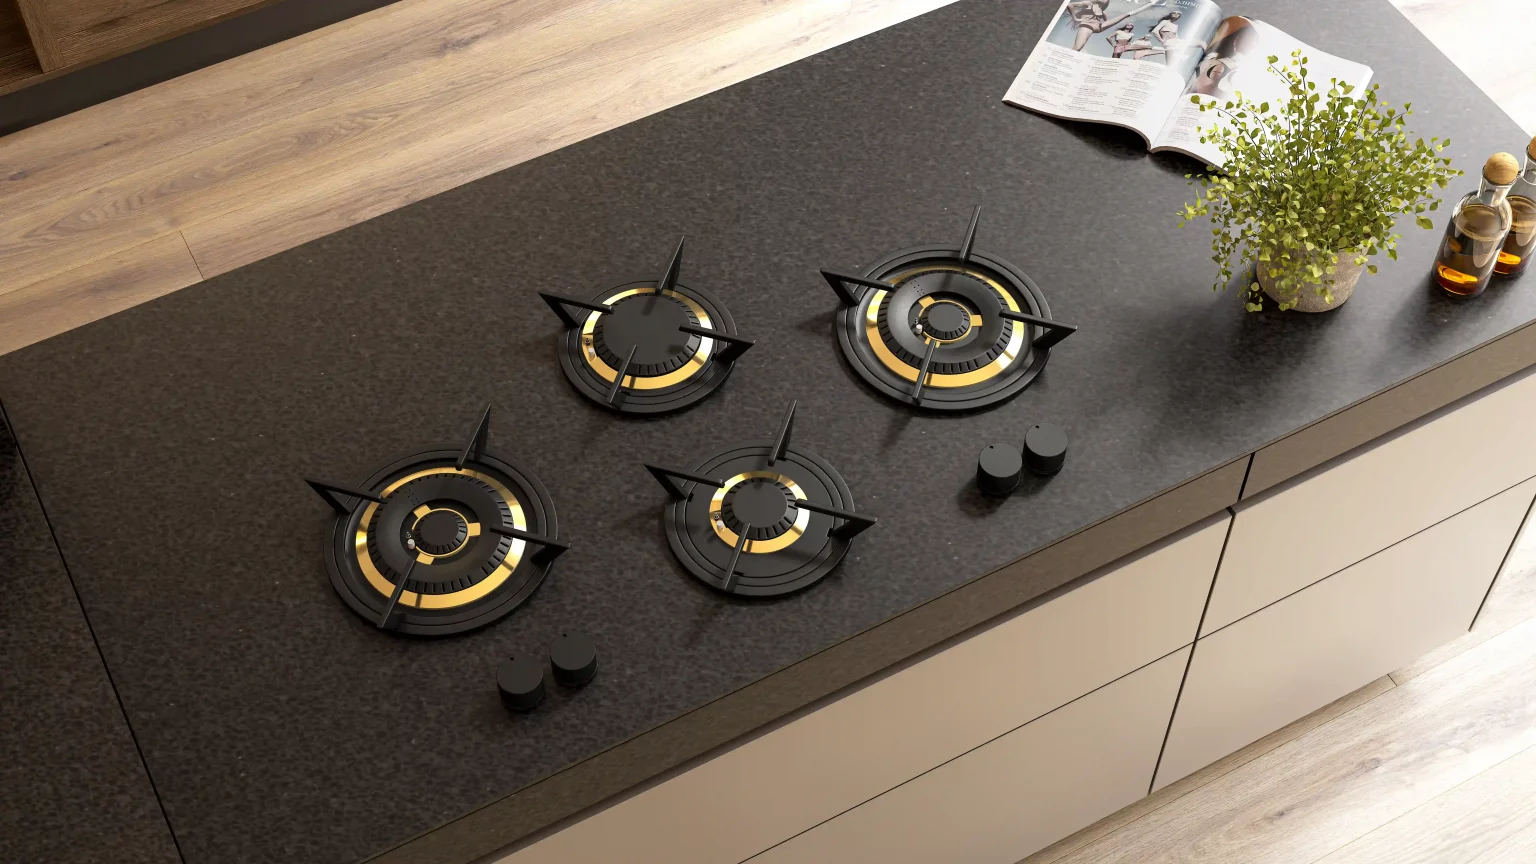 Set of four black burners on a black countertop